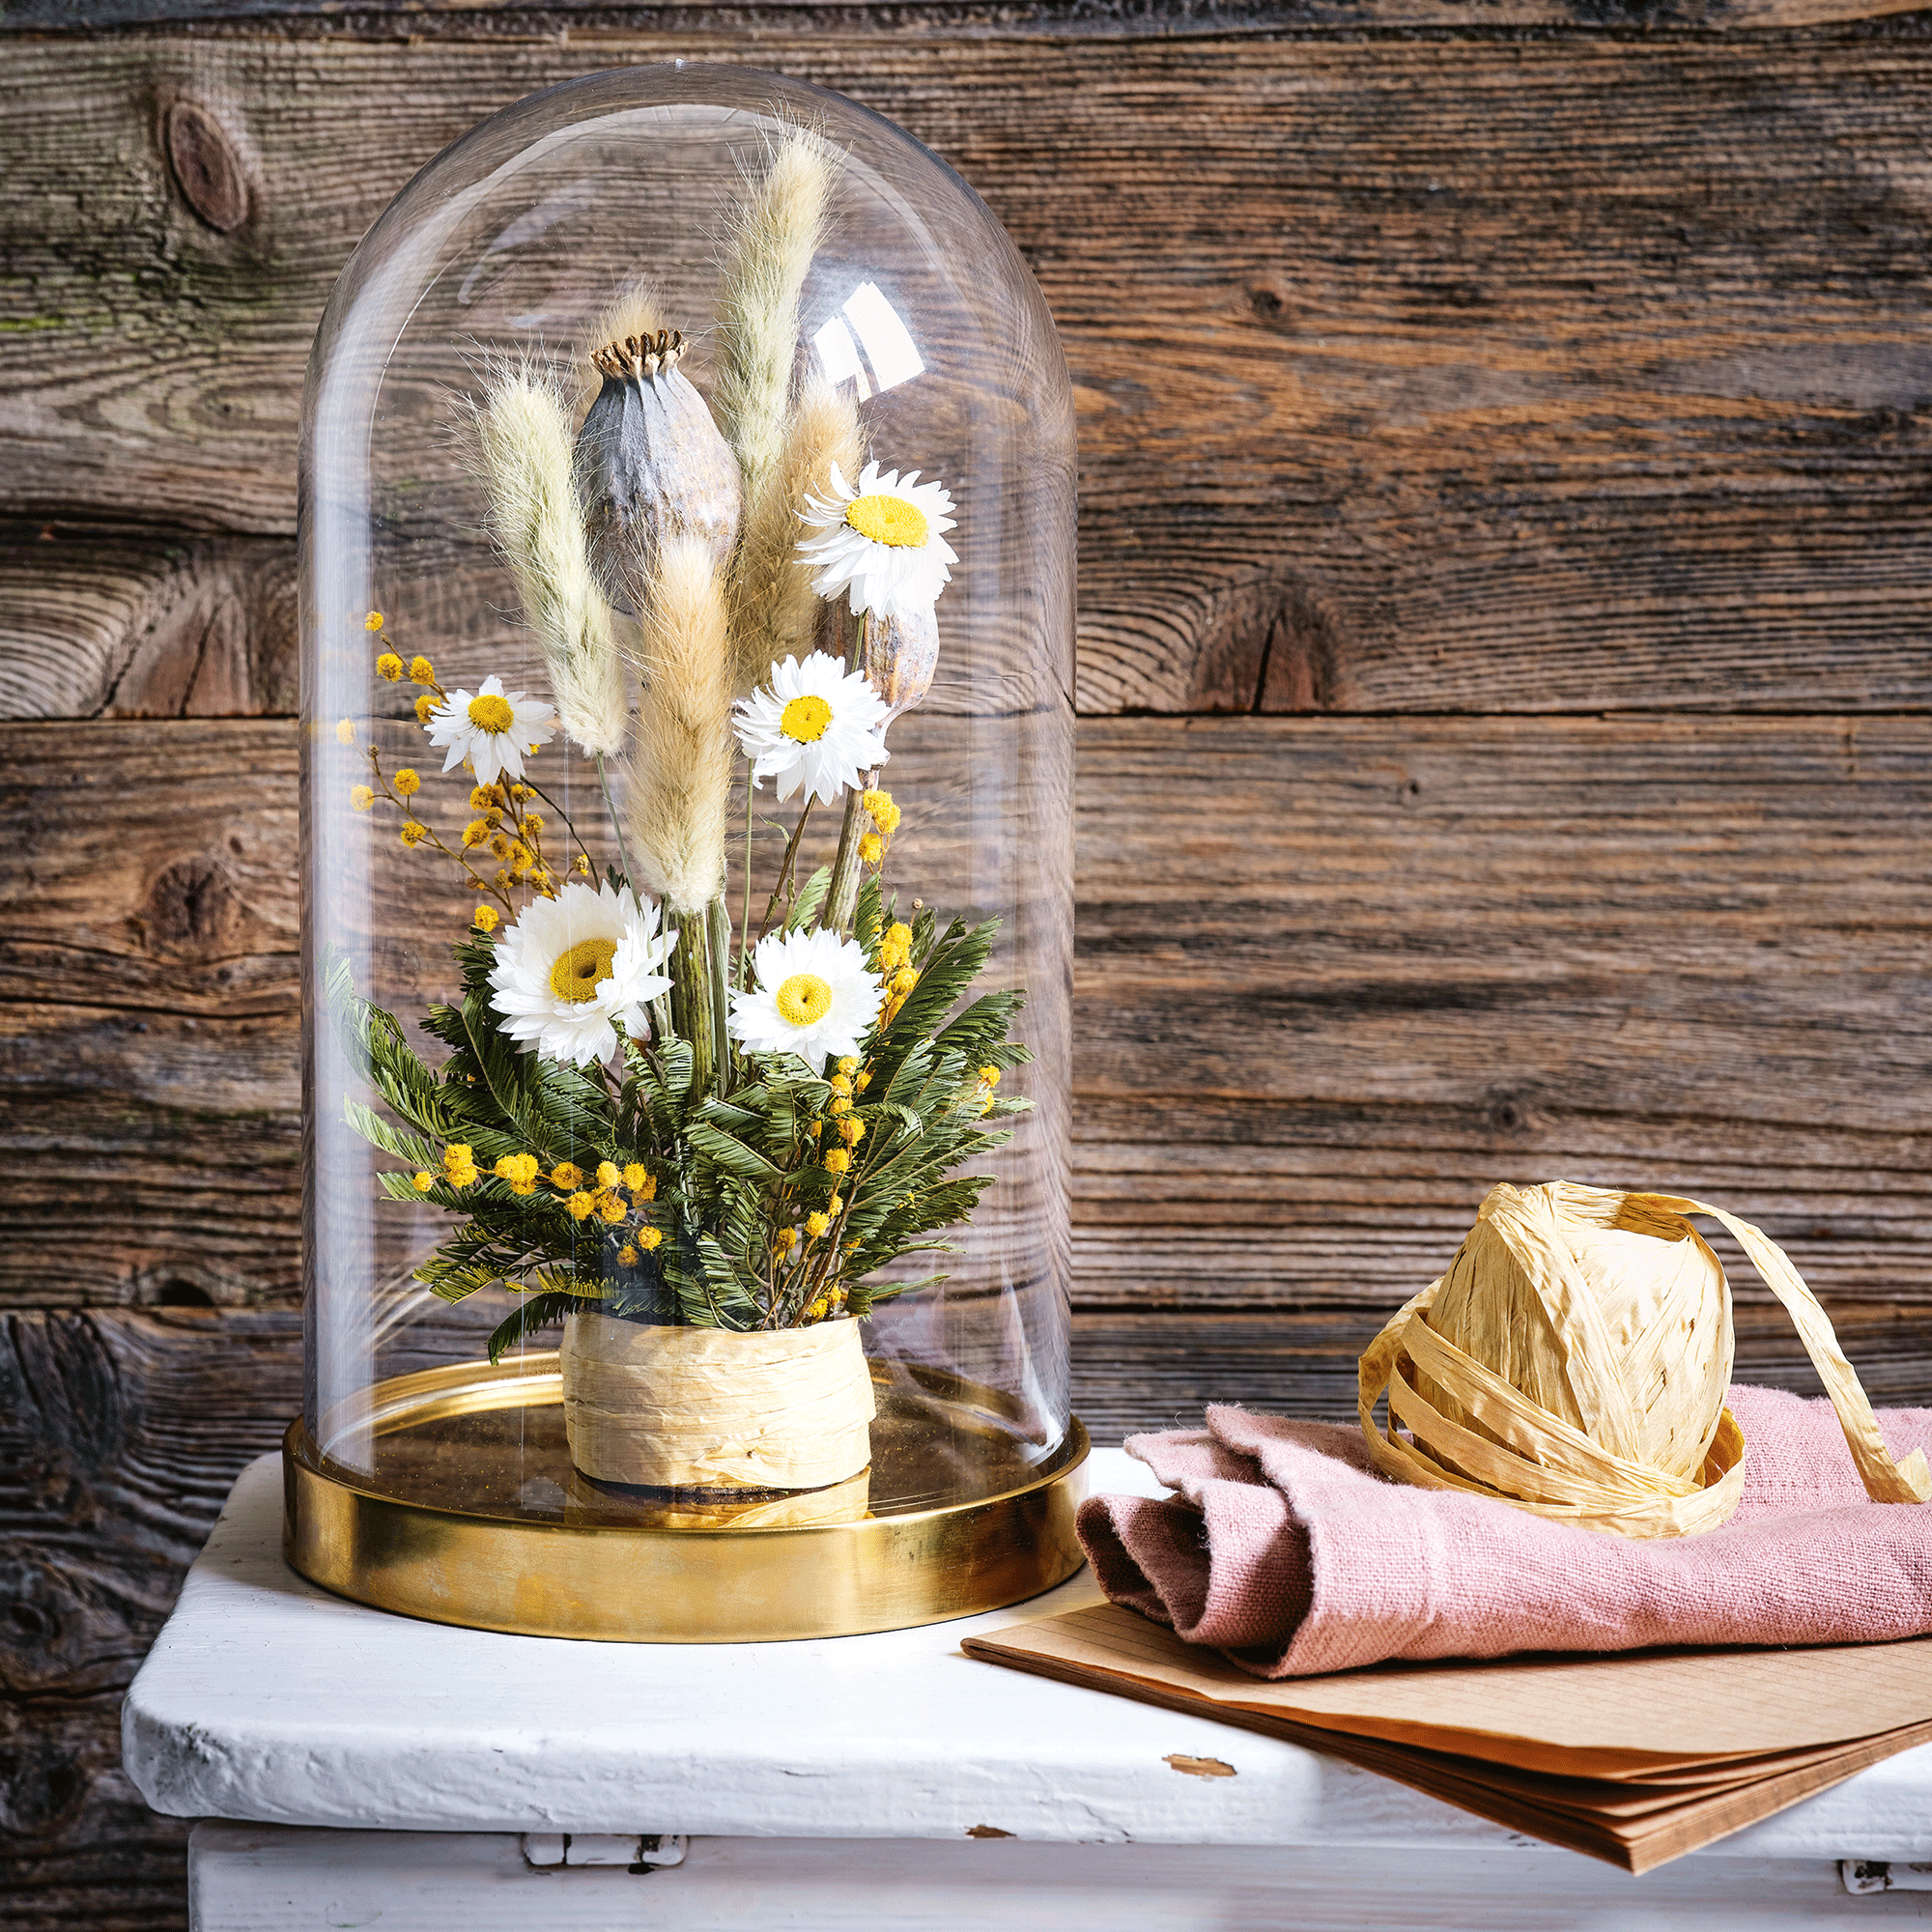 Dried flowers under a cloche